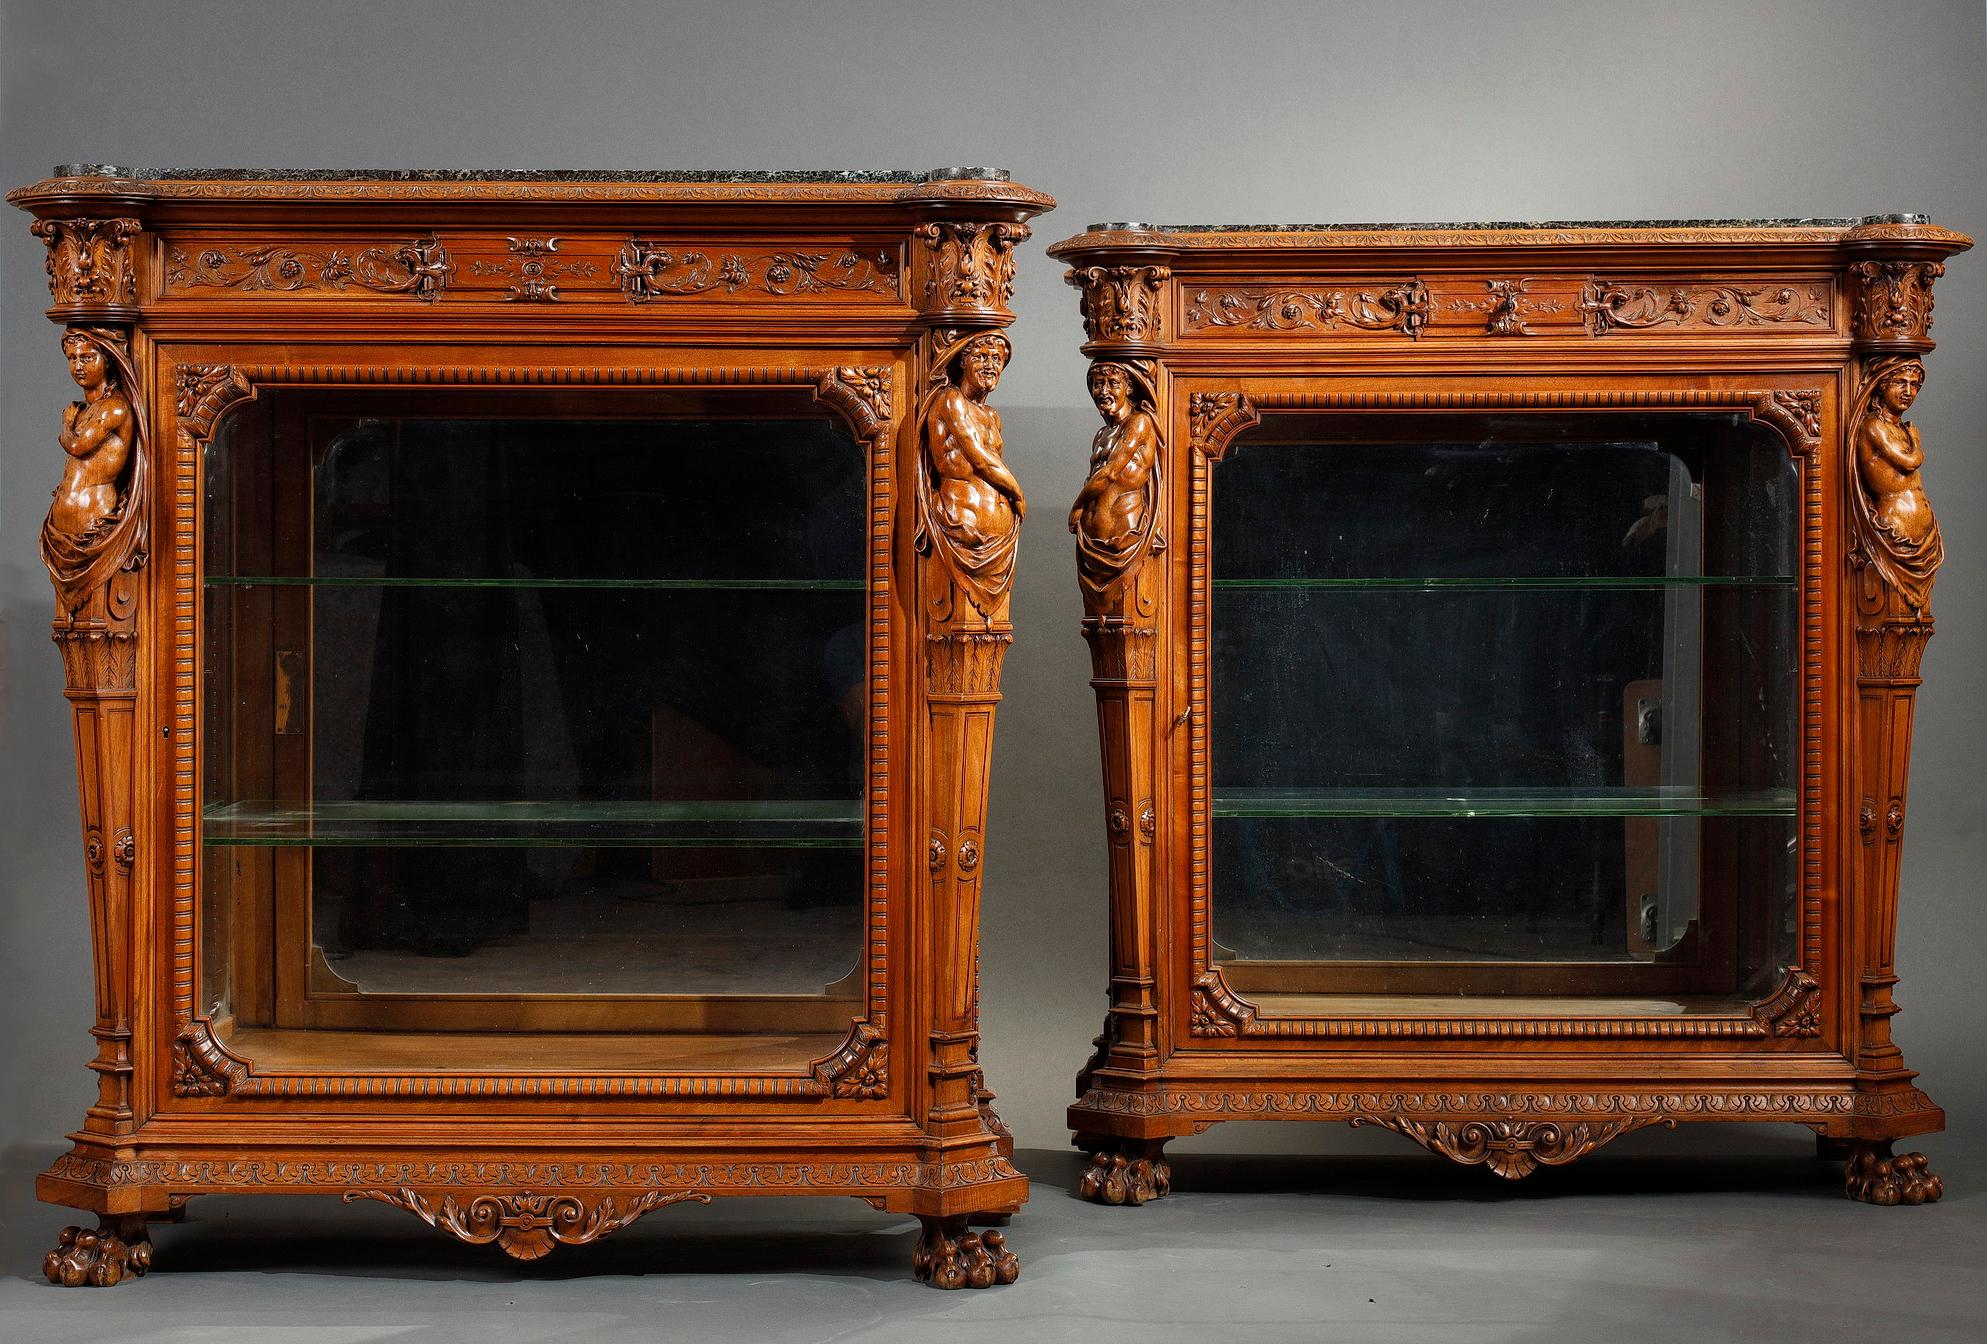 Fine pair of neo-Renaissance vitrines in richly carved wood, with three glazed sides framed by a relief frieze. Each opening to a drawer decorated with interlacing on the belt, and to a front door, they have two glass shelves. The uprights are